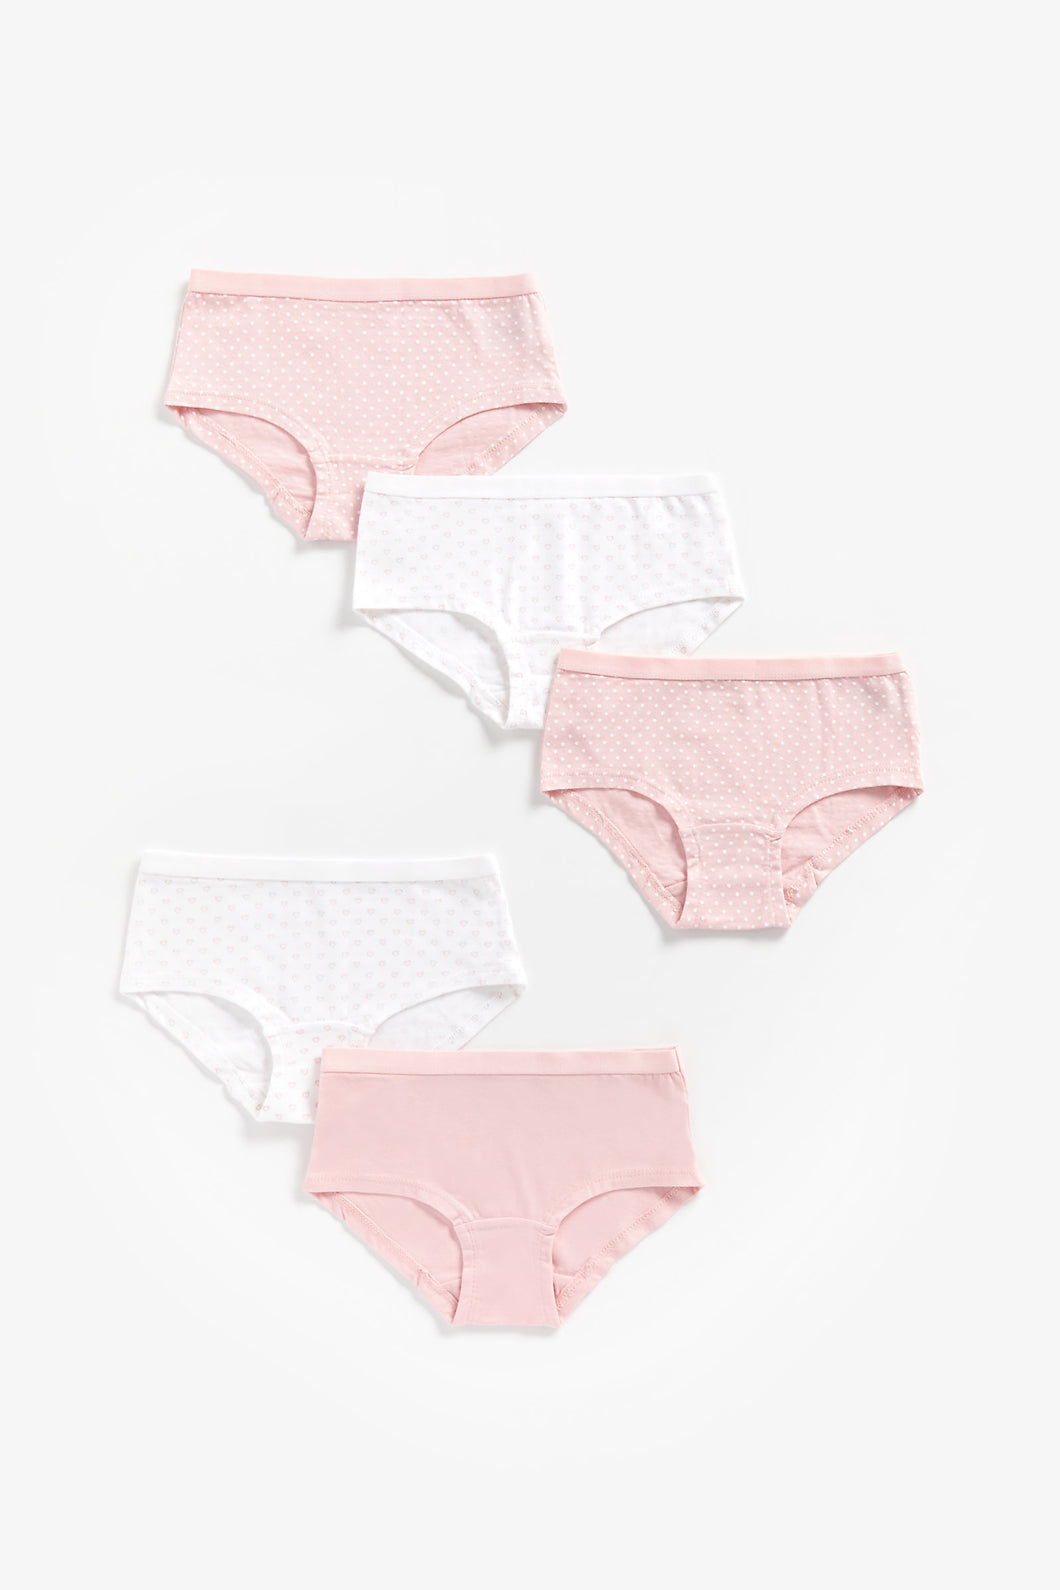 Mothercare Pink And White Hipster Briefs - 5 Pack